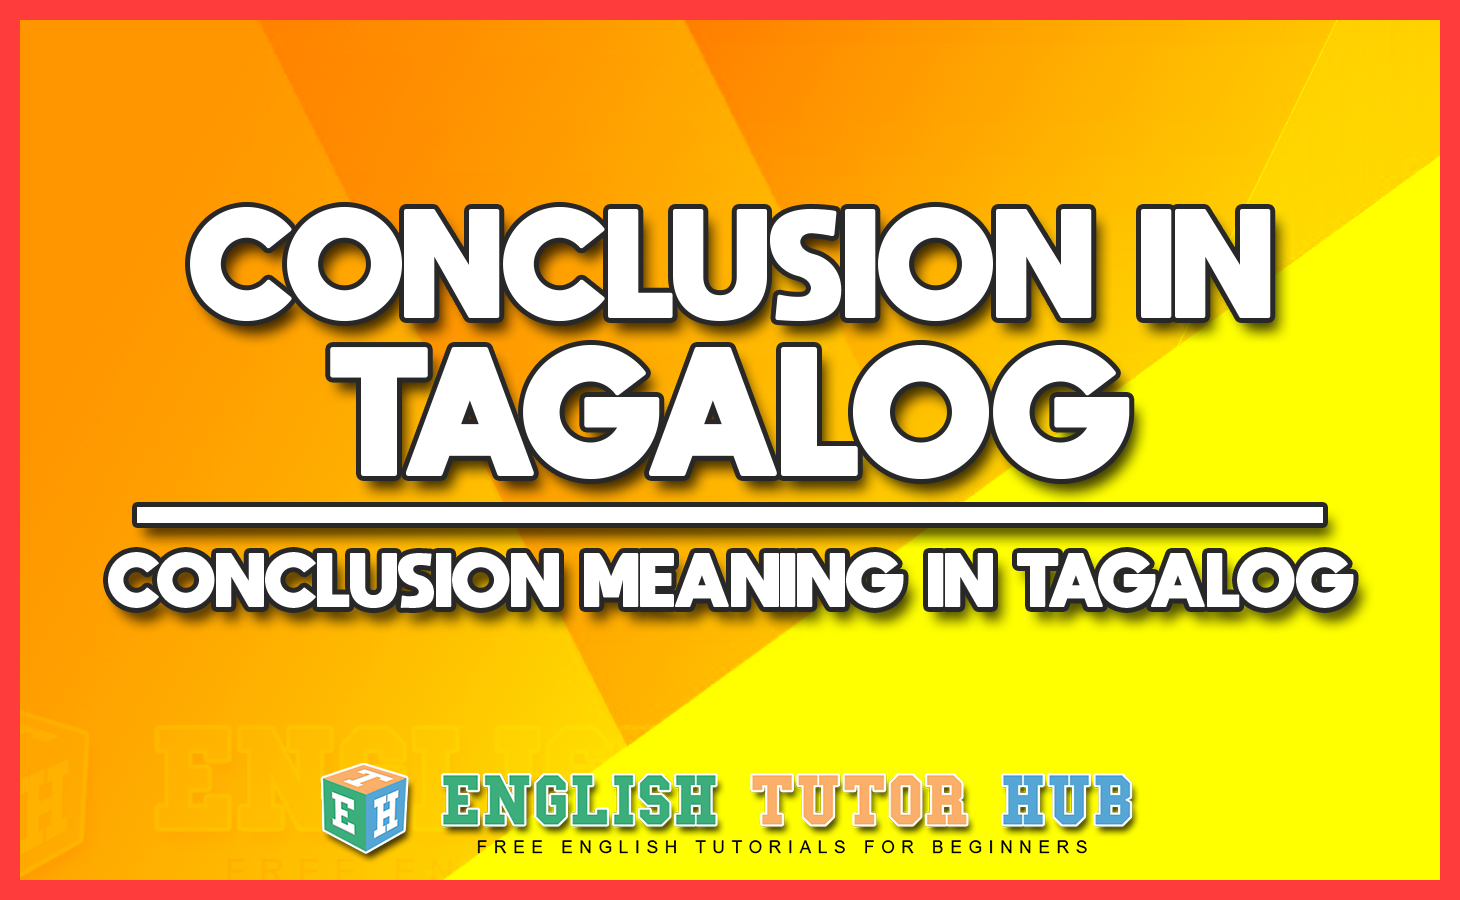 CONCLUSION IN TAGALOG - CONCLUSION MEANING IN TAGALOG